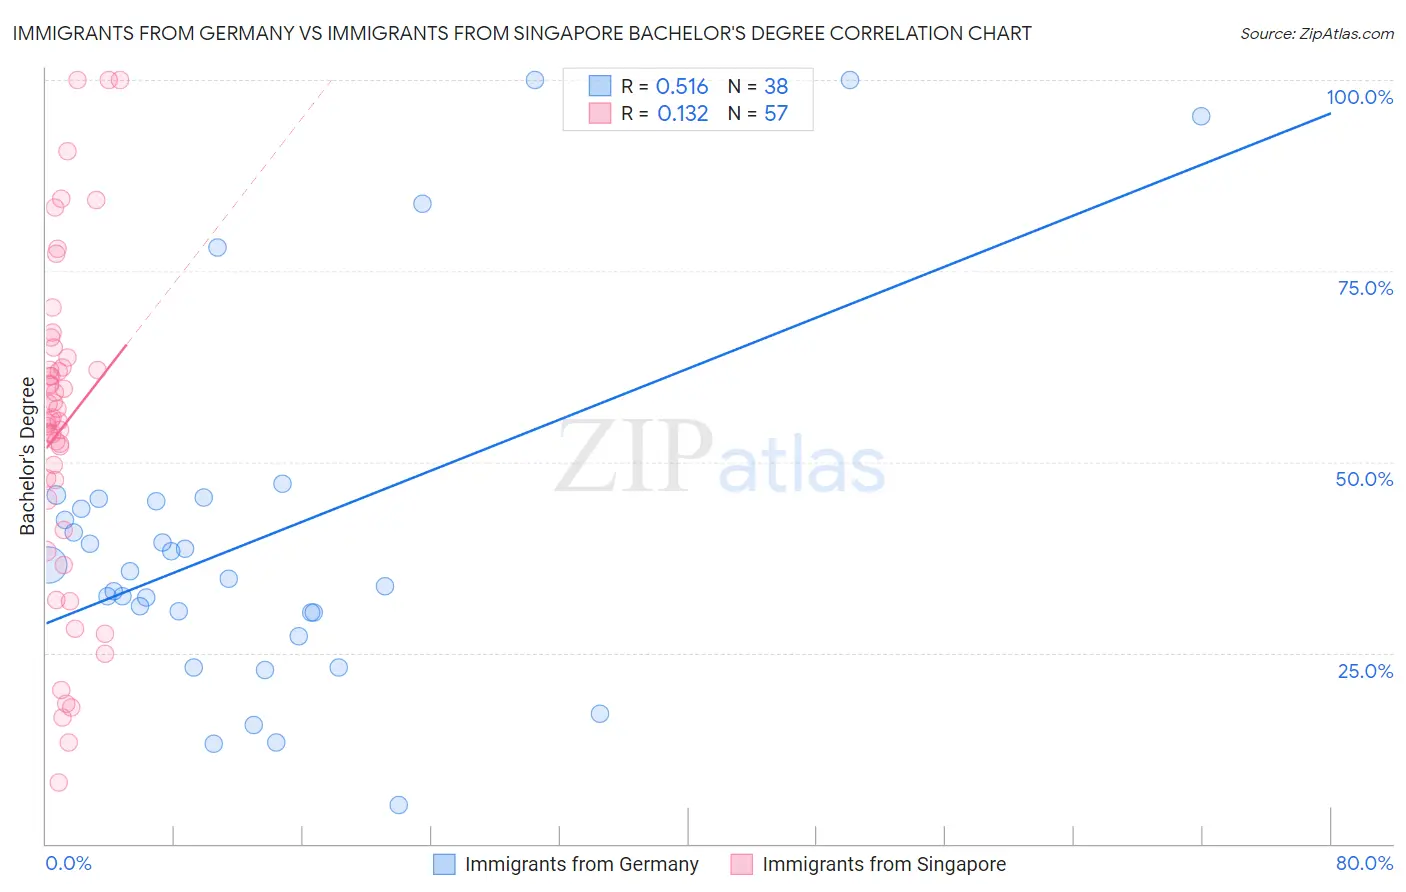 Immigrants from Germany vs Immigrants from Singapore Bachelor's Degree